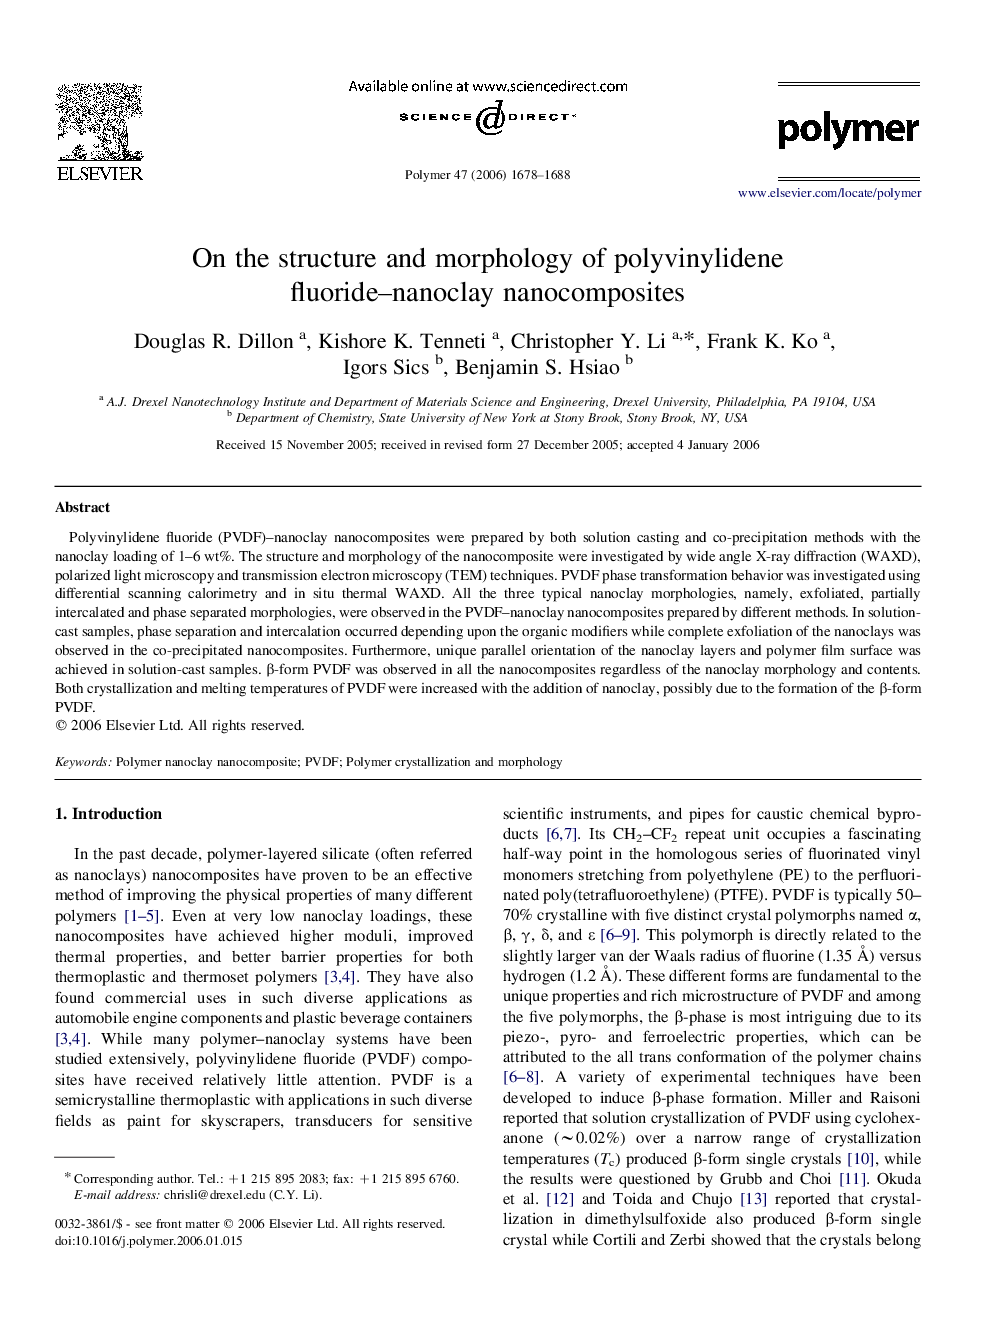 On the structure and morphology of polyvinylidene fluoride-nanoclay nanocomposites